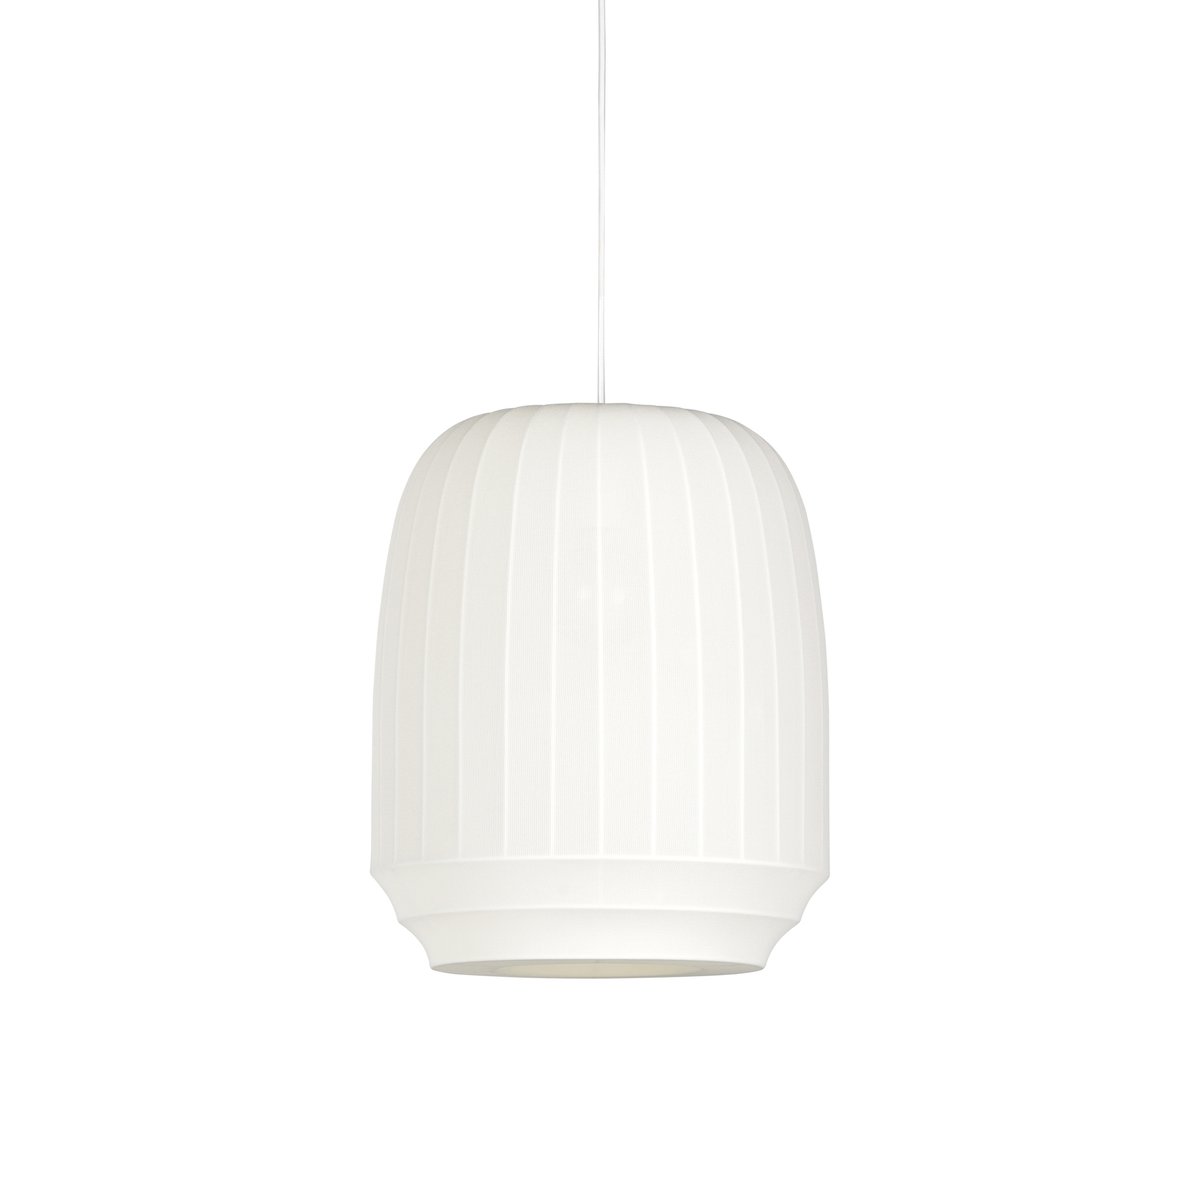 Northern Tradition hanglamp tall White